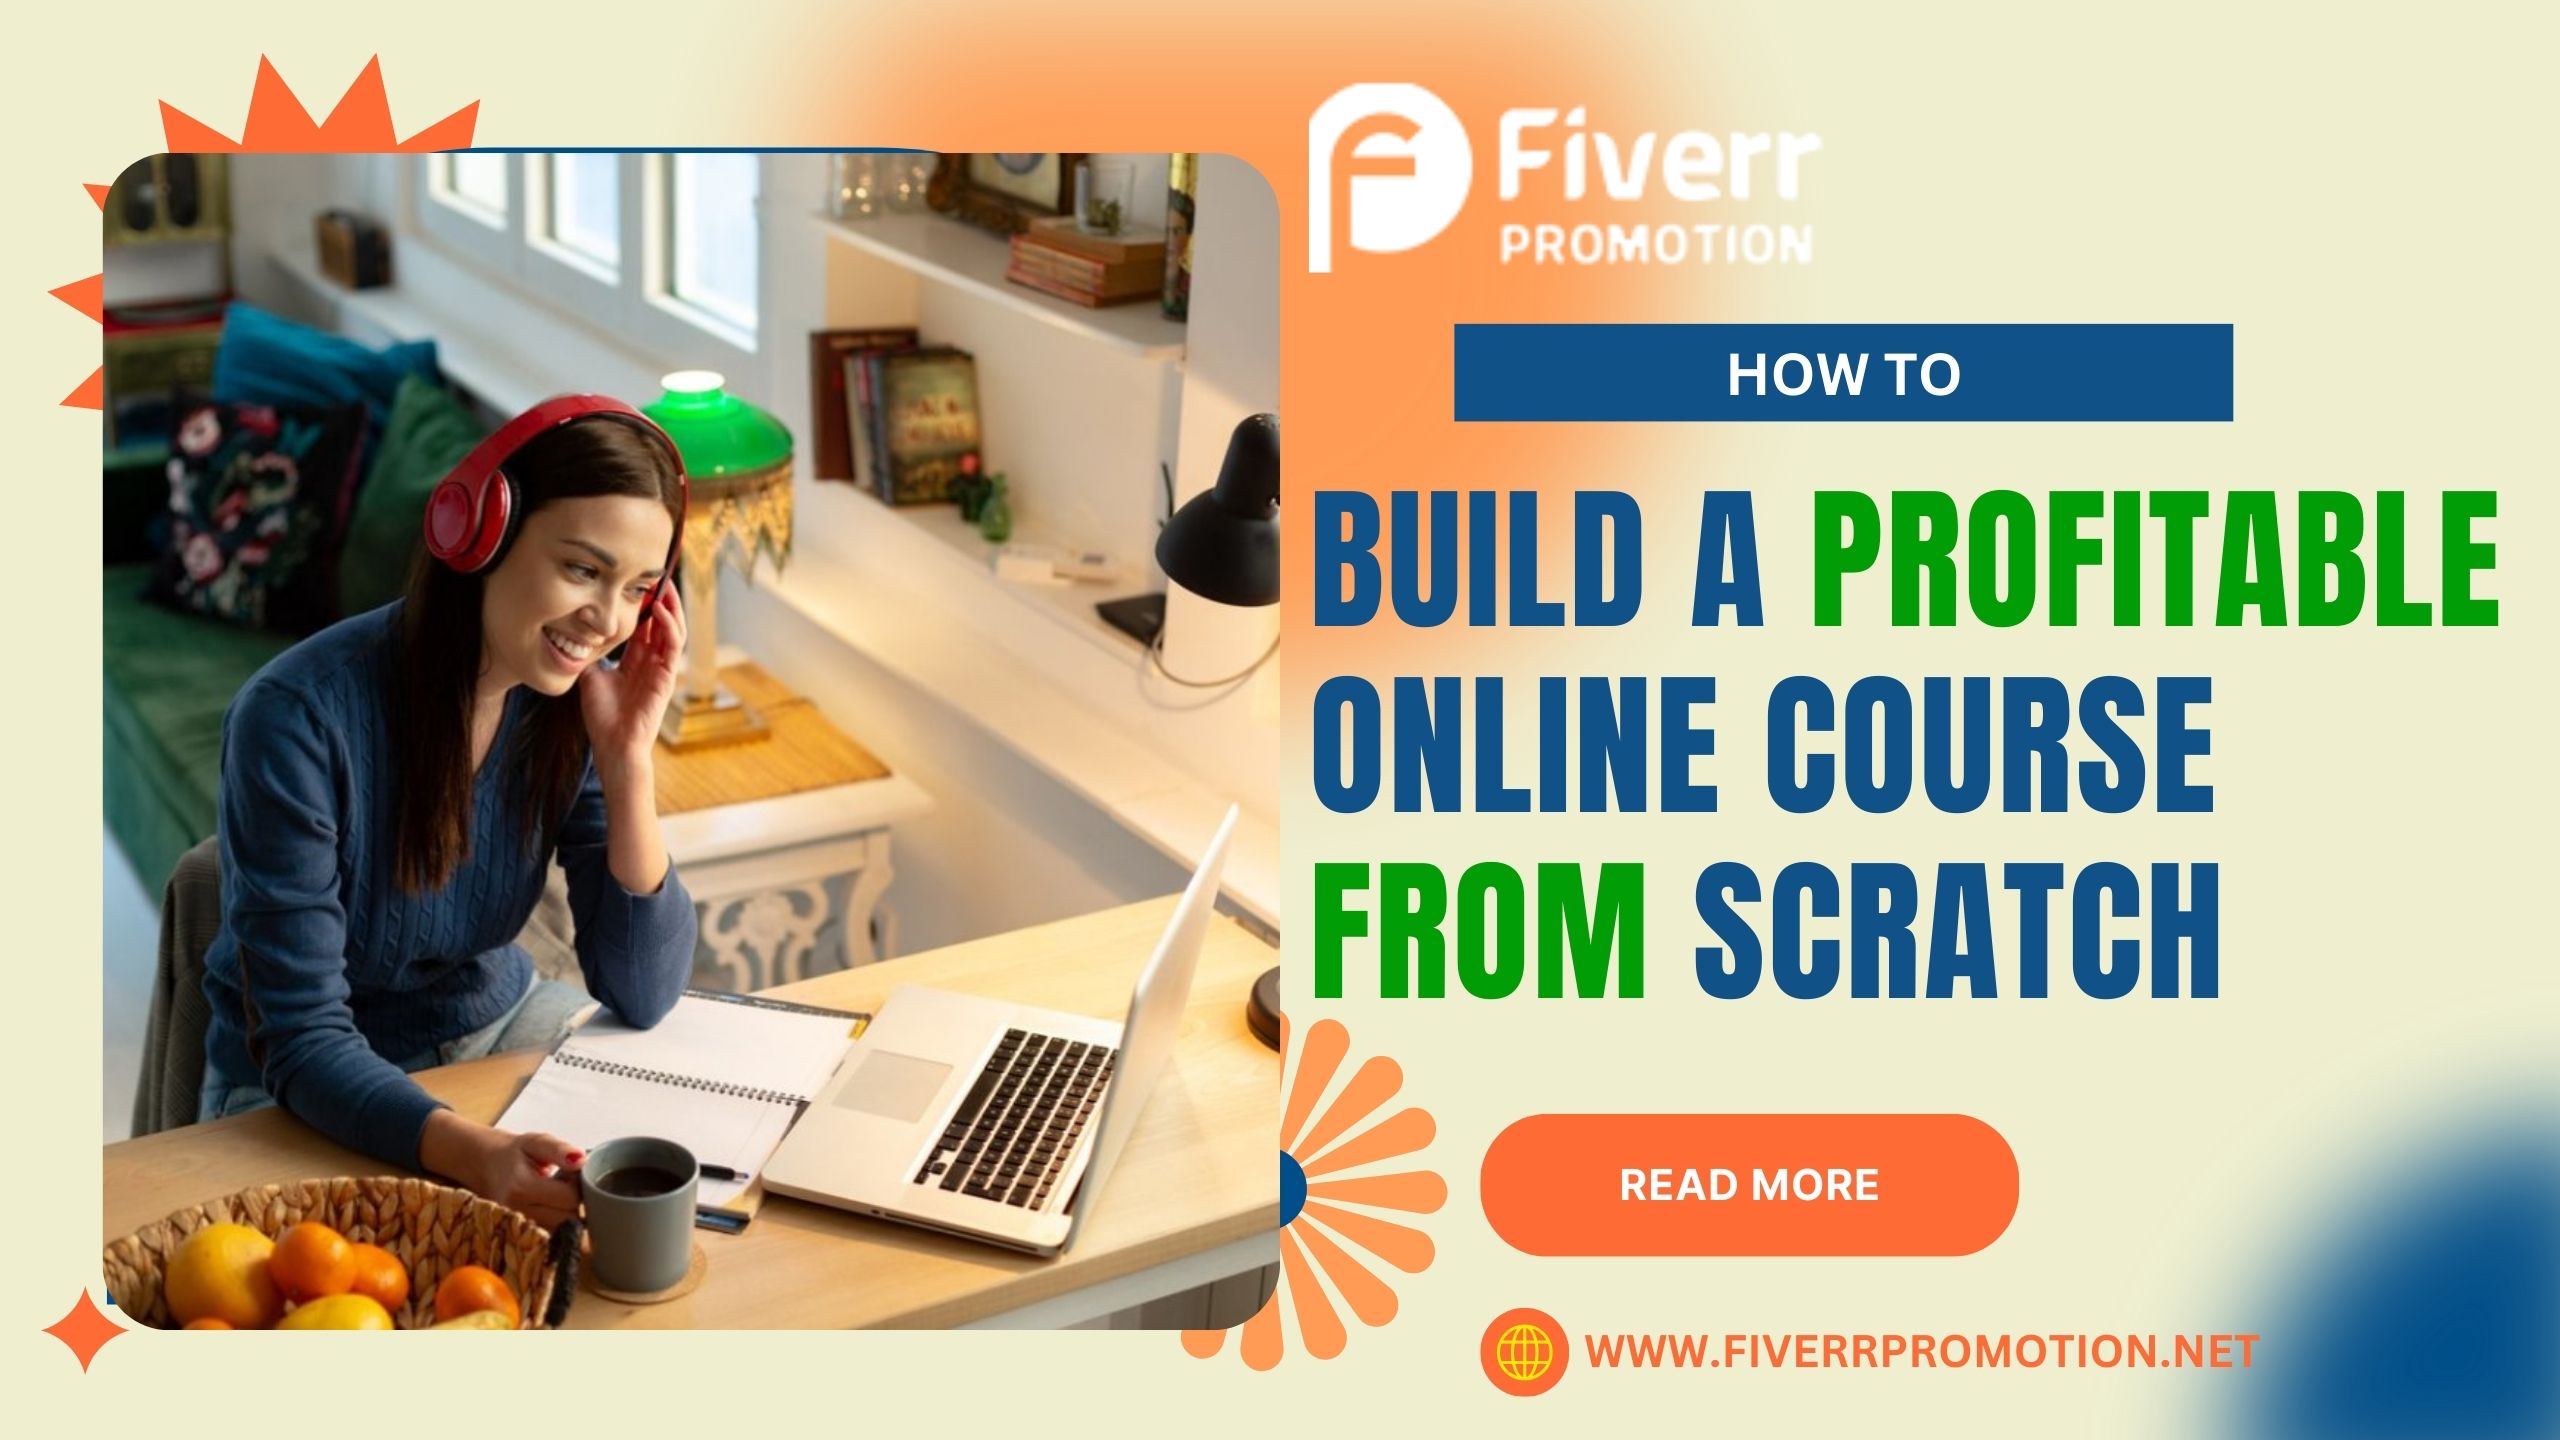 How to Build a Profitable Online Course from Scratch